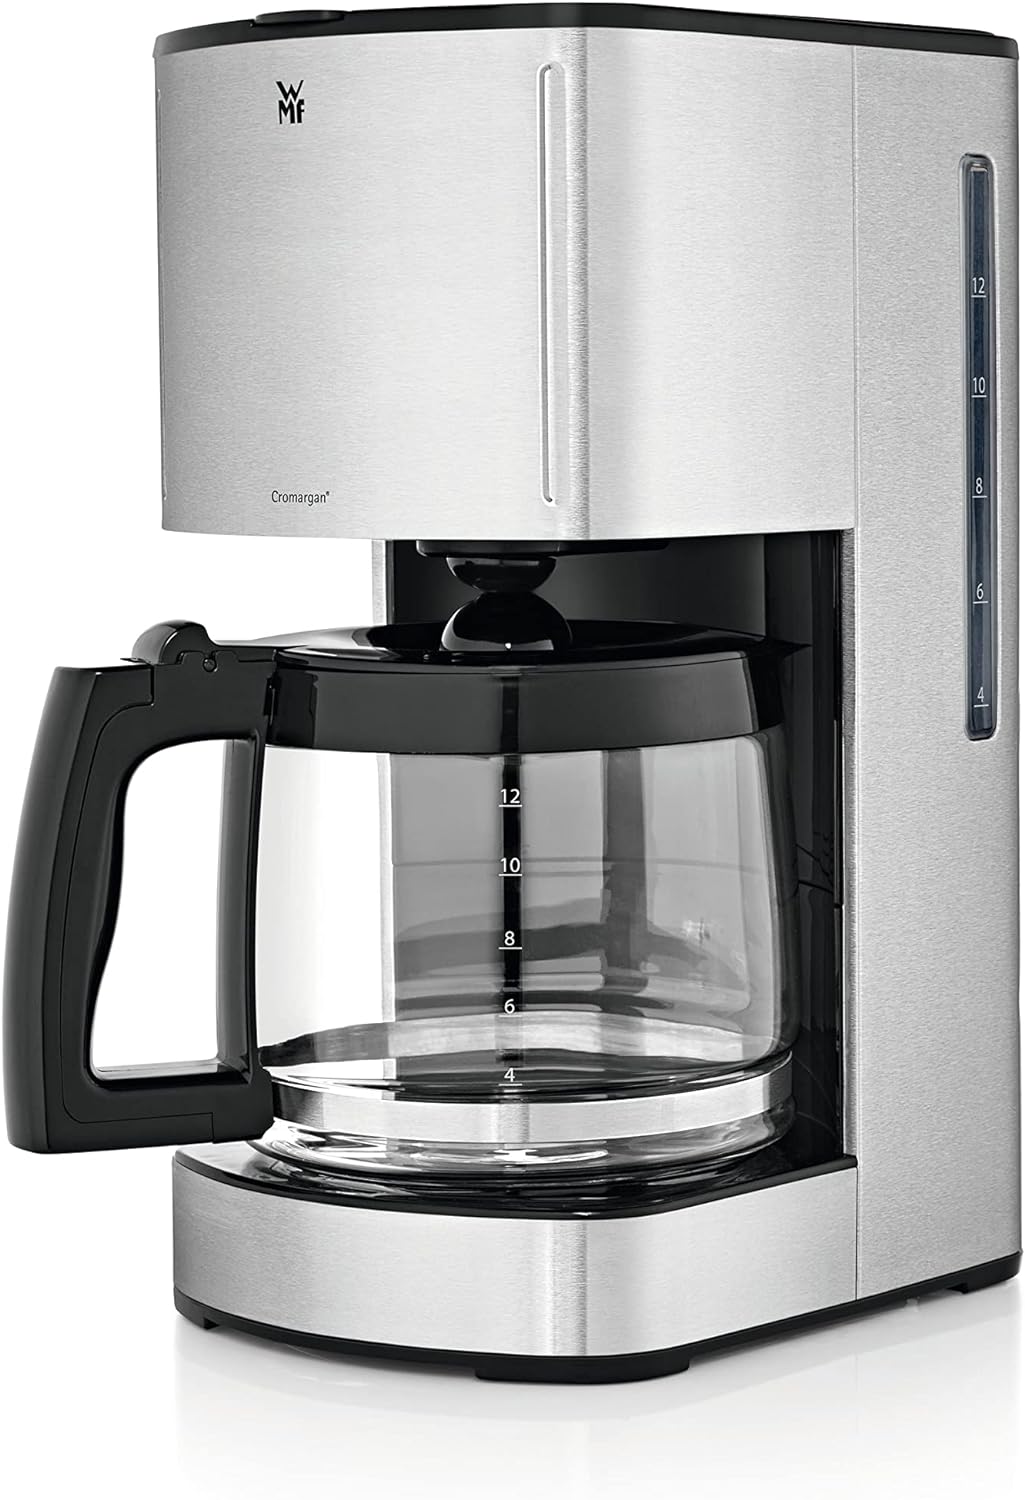 WMF Skyline Filter Coffee Machine with Glass Jug, Filter Coffee, 12 Cups, Warming Plate, Removable Water Tank, Drip Stop, Automatic Shut-Off, 1000 W